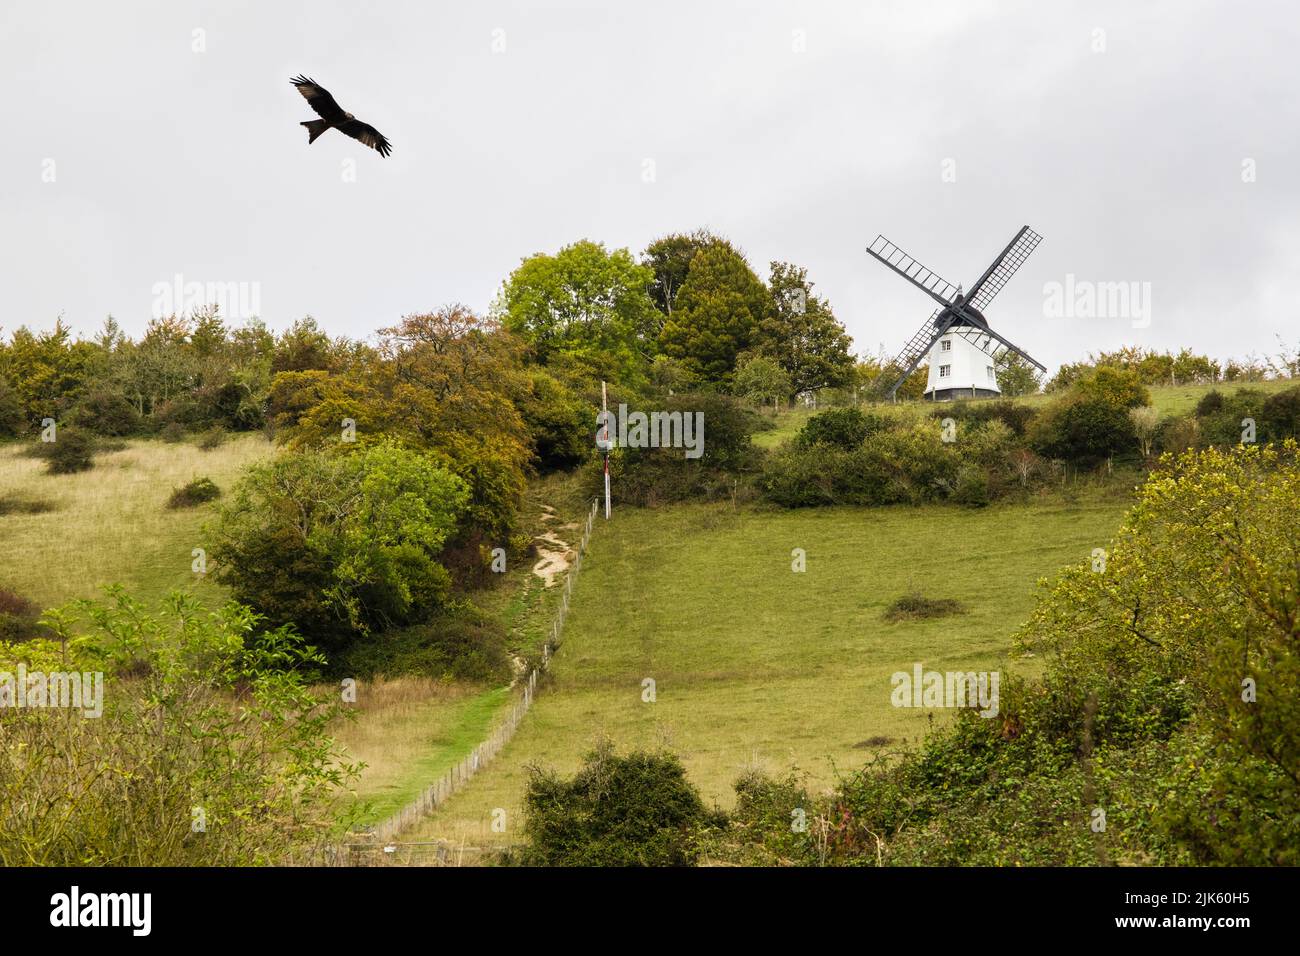 A Red Kite flies over Cobstone Windmill on Turville Hill in Chilterns. Turville, Buckinghamshire, England, UK, Britain Stock Photo